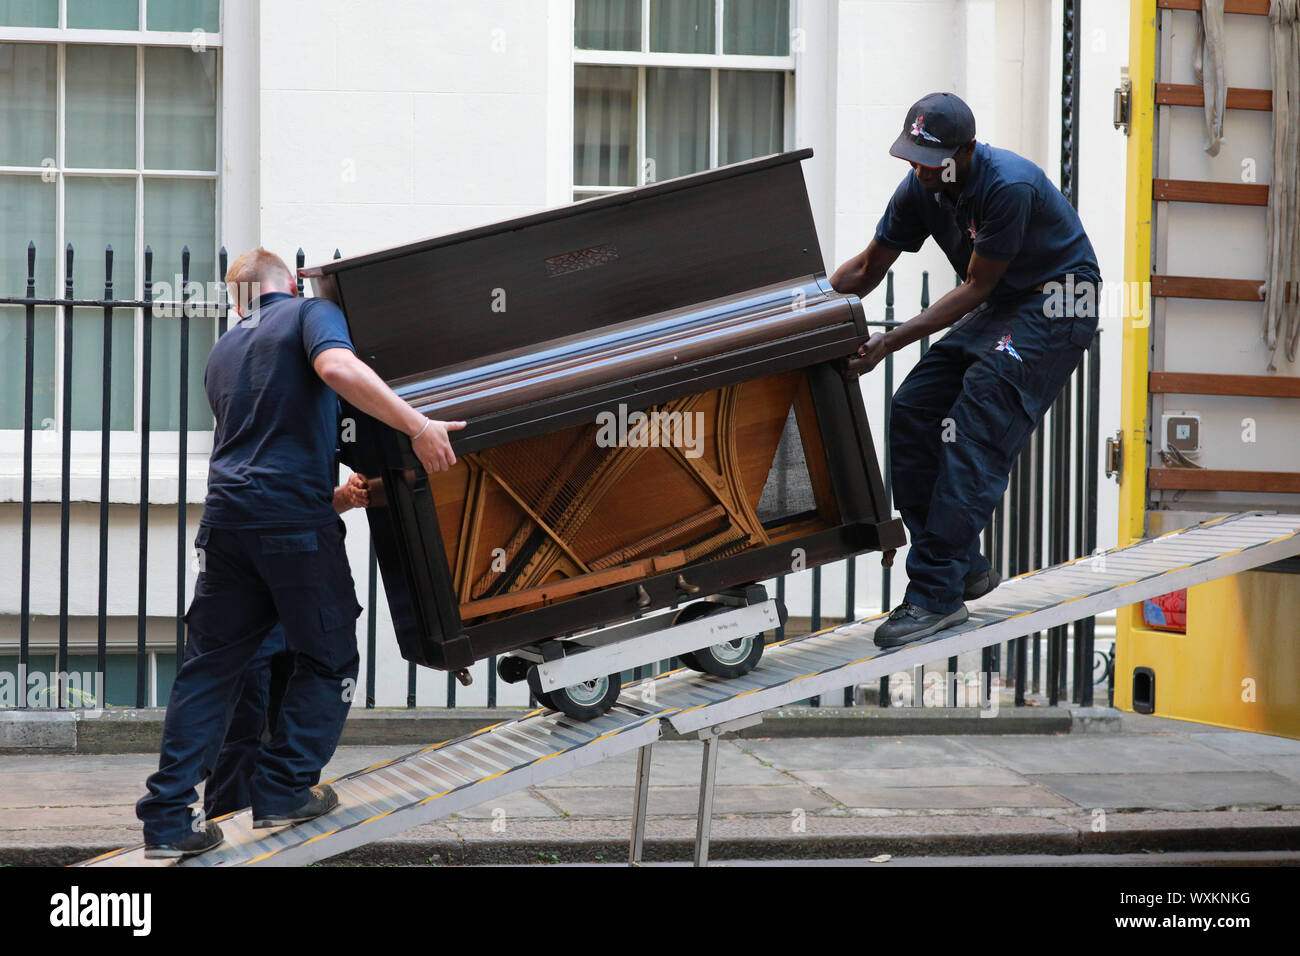 Westminster, London, UK. 17th Sep, 2019. Two delivery men struggle with the large musical instrument. A piano is delivered to No 11, Downing Street by a removal firm. The flat above No 11 is believed to now be the official residence of PM Johnson. Credit: Imageplotter/Alamy Live News Stock Photo